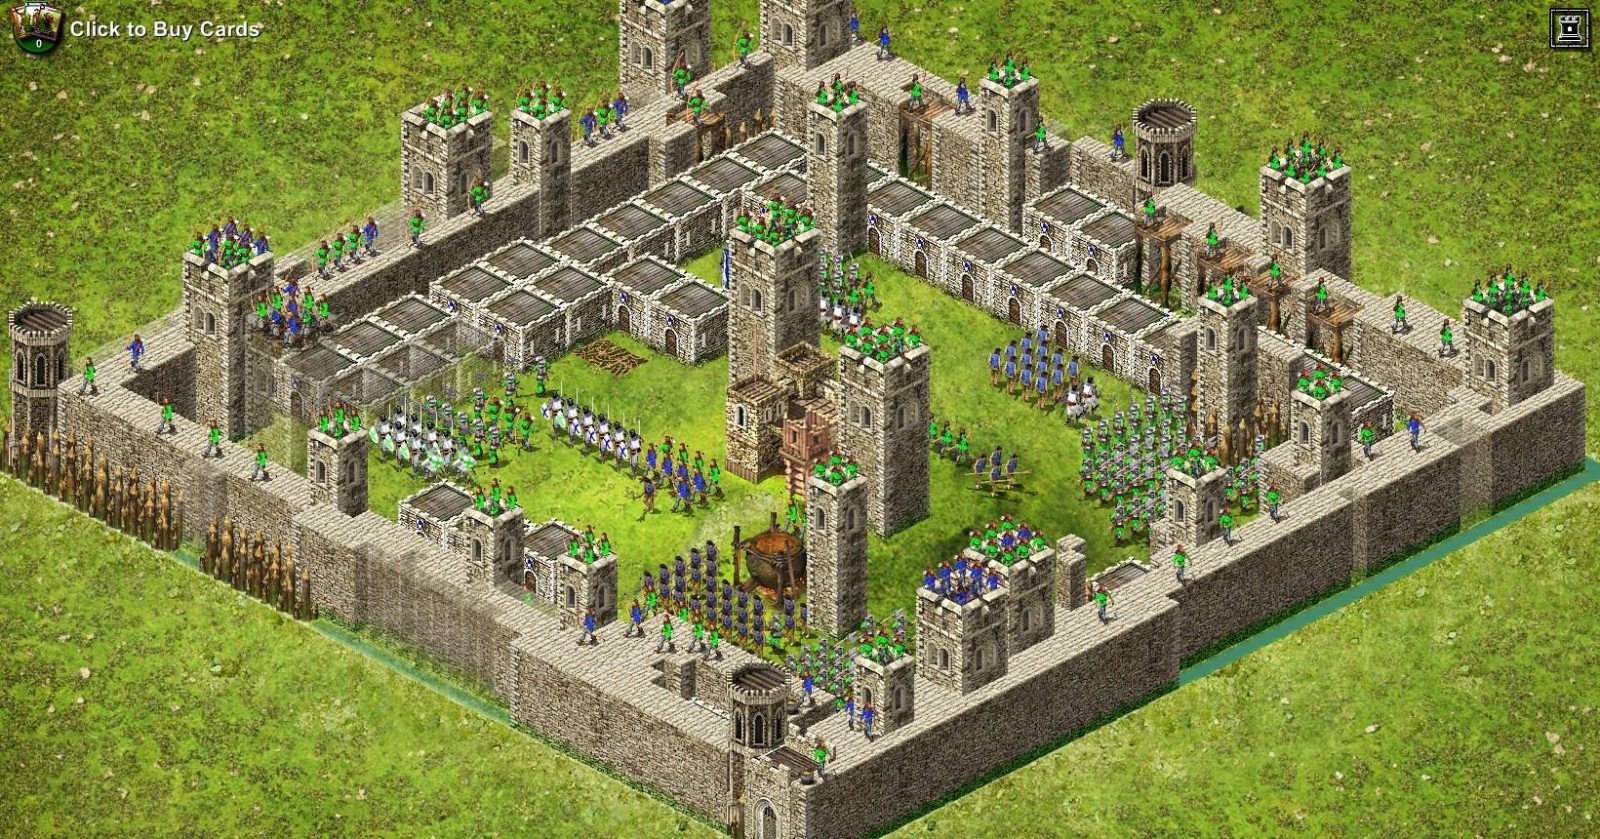 stronghold kingdoms account